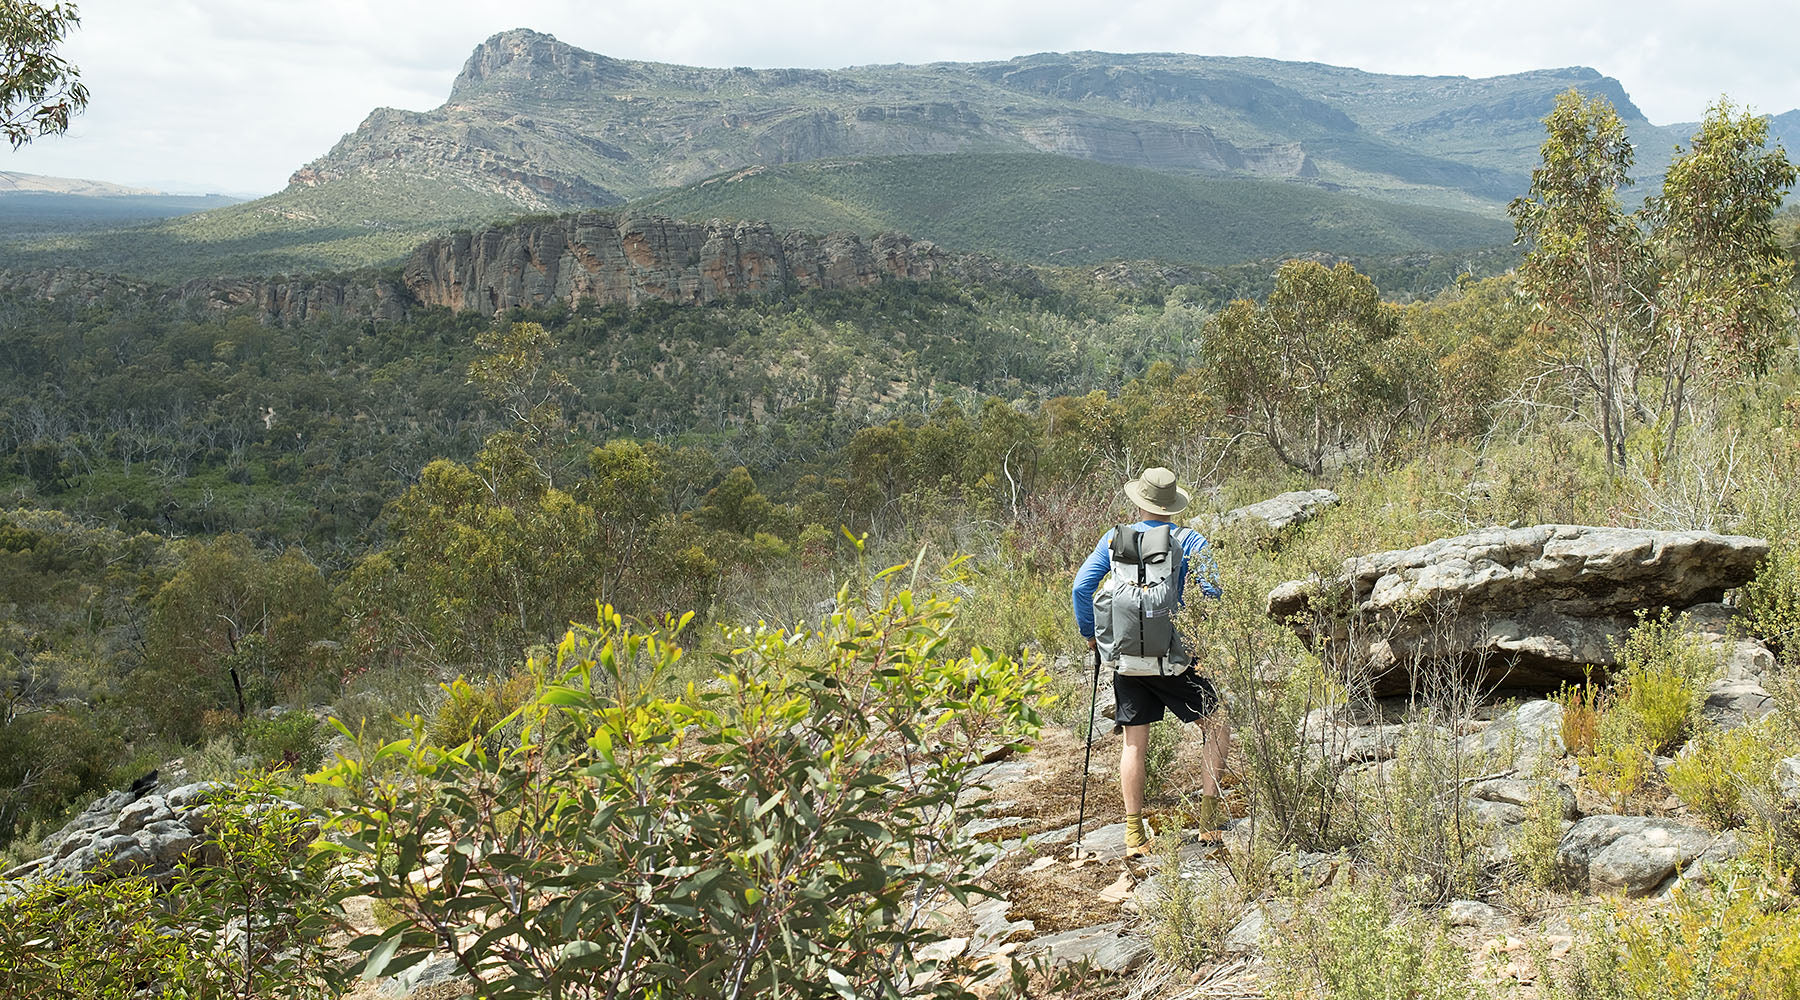 A hiker carrying a backpack, handmade by OrangeBrown in Australia, through the beautiful landscape along the Grampians Peaks Trail